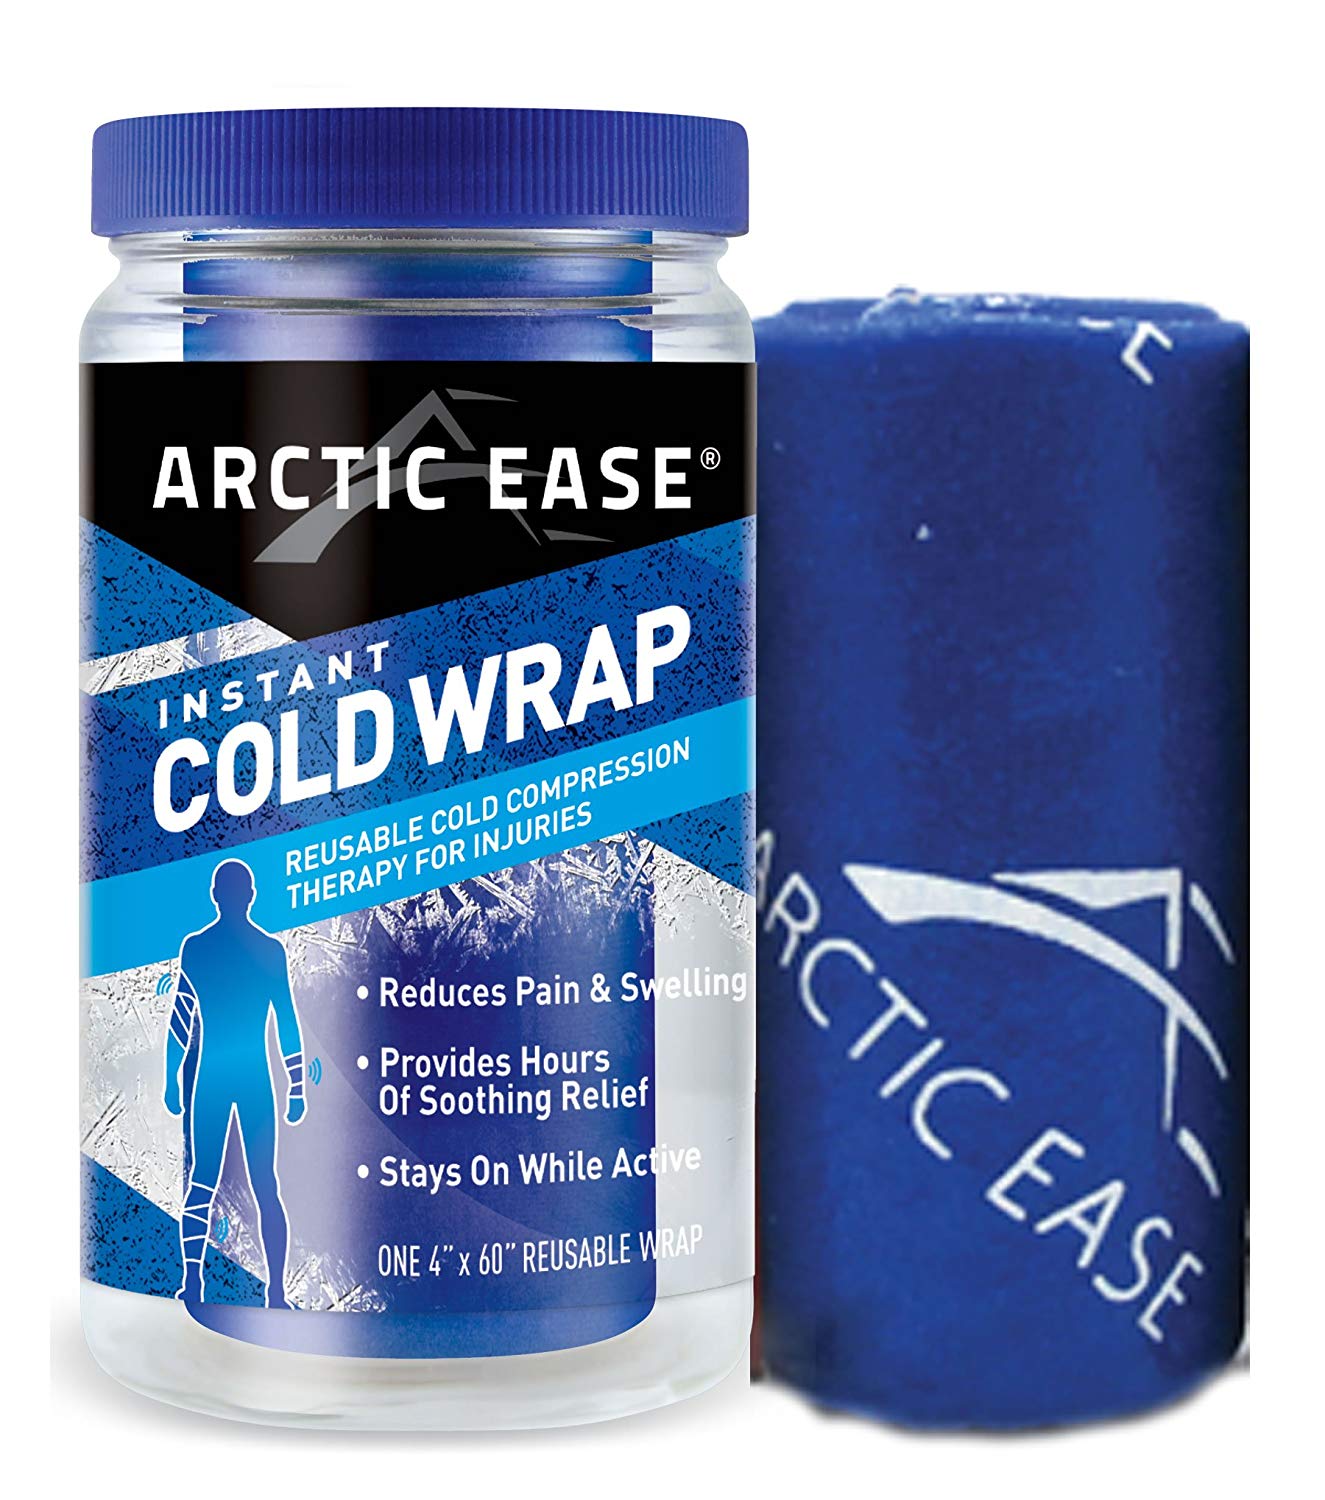 Arctic Ease Cold Wrap feature